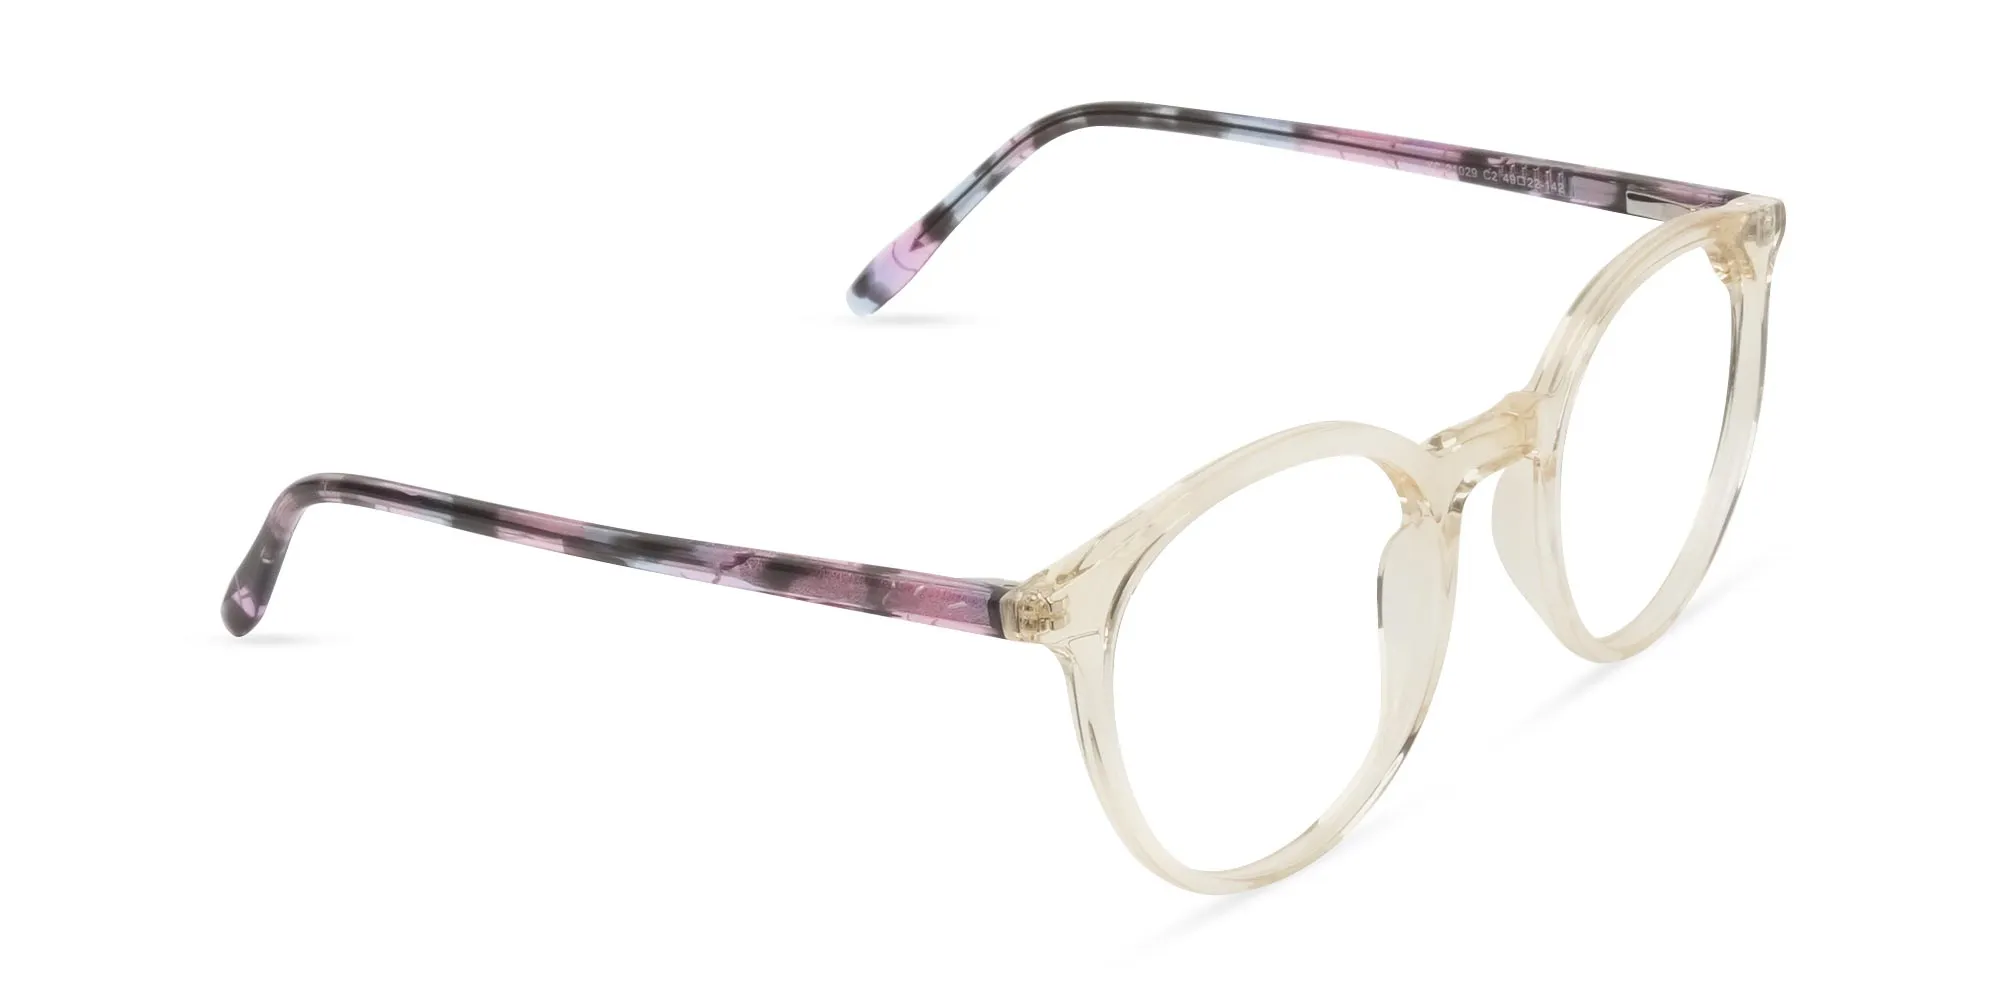 Crystal Amber Yellow Glasses Frames with Pink & Blue Tortoise Temple - 2